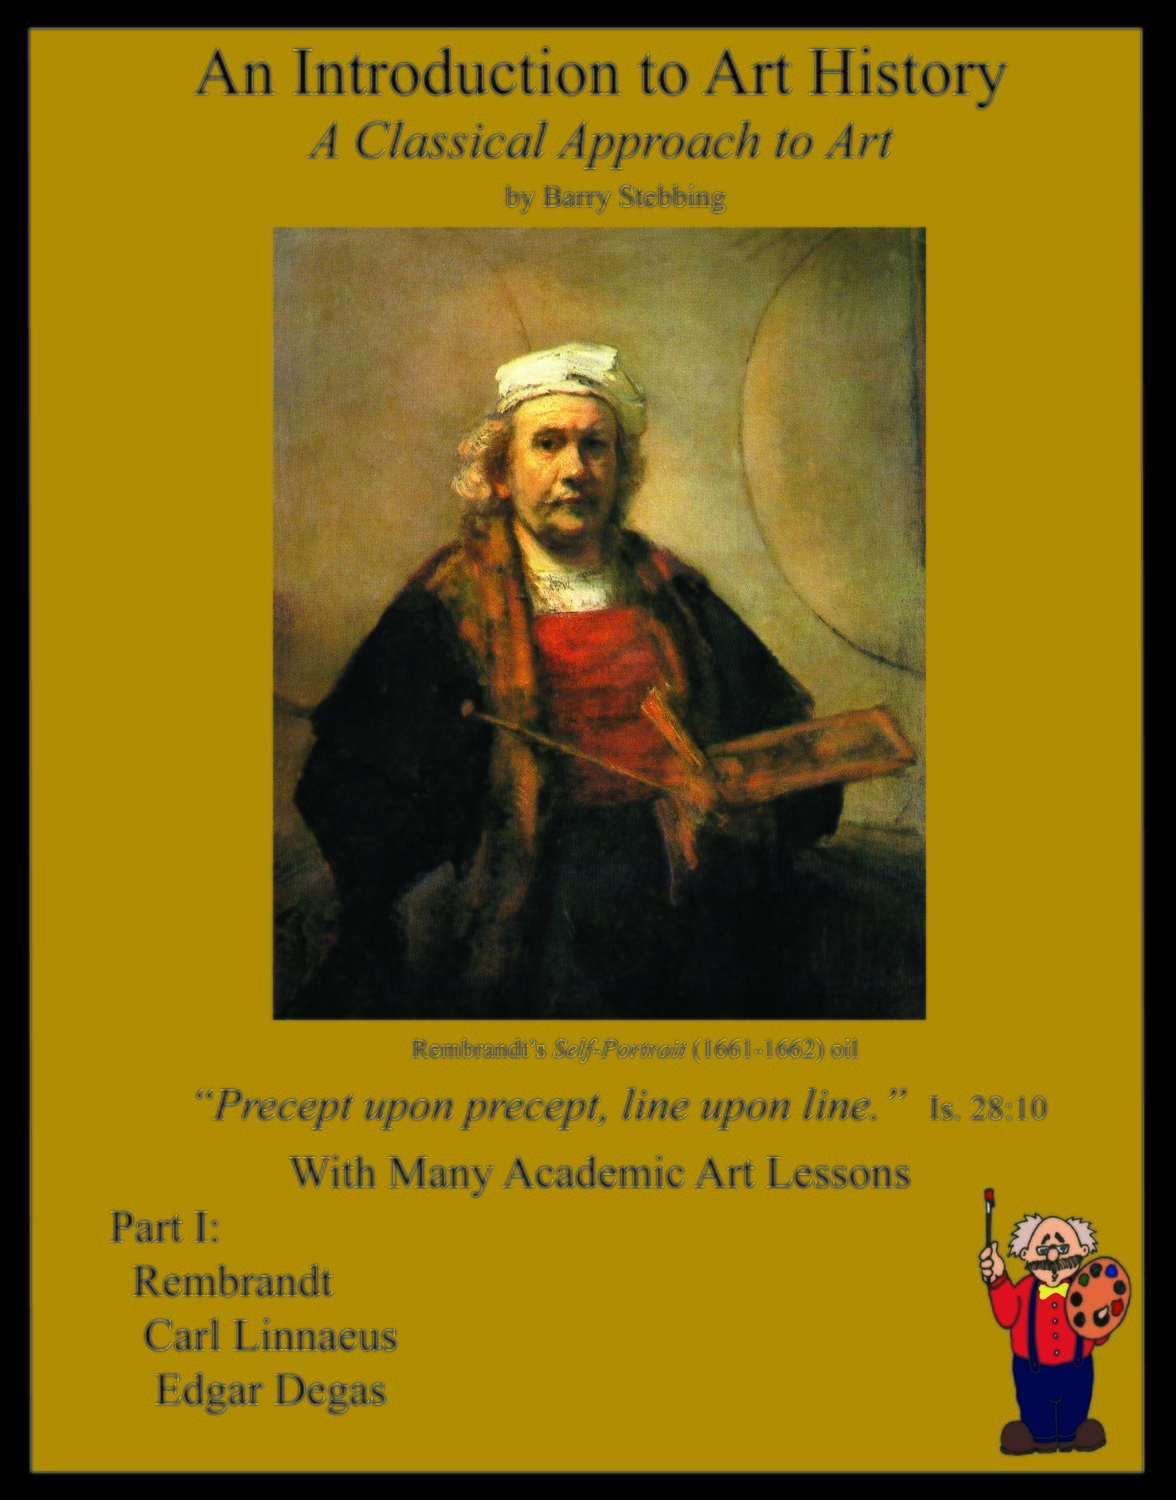 An　Art　history,　Introduction　Masters:　to　Linnaeus,　Degas　Classical　Rembrandt,